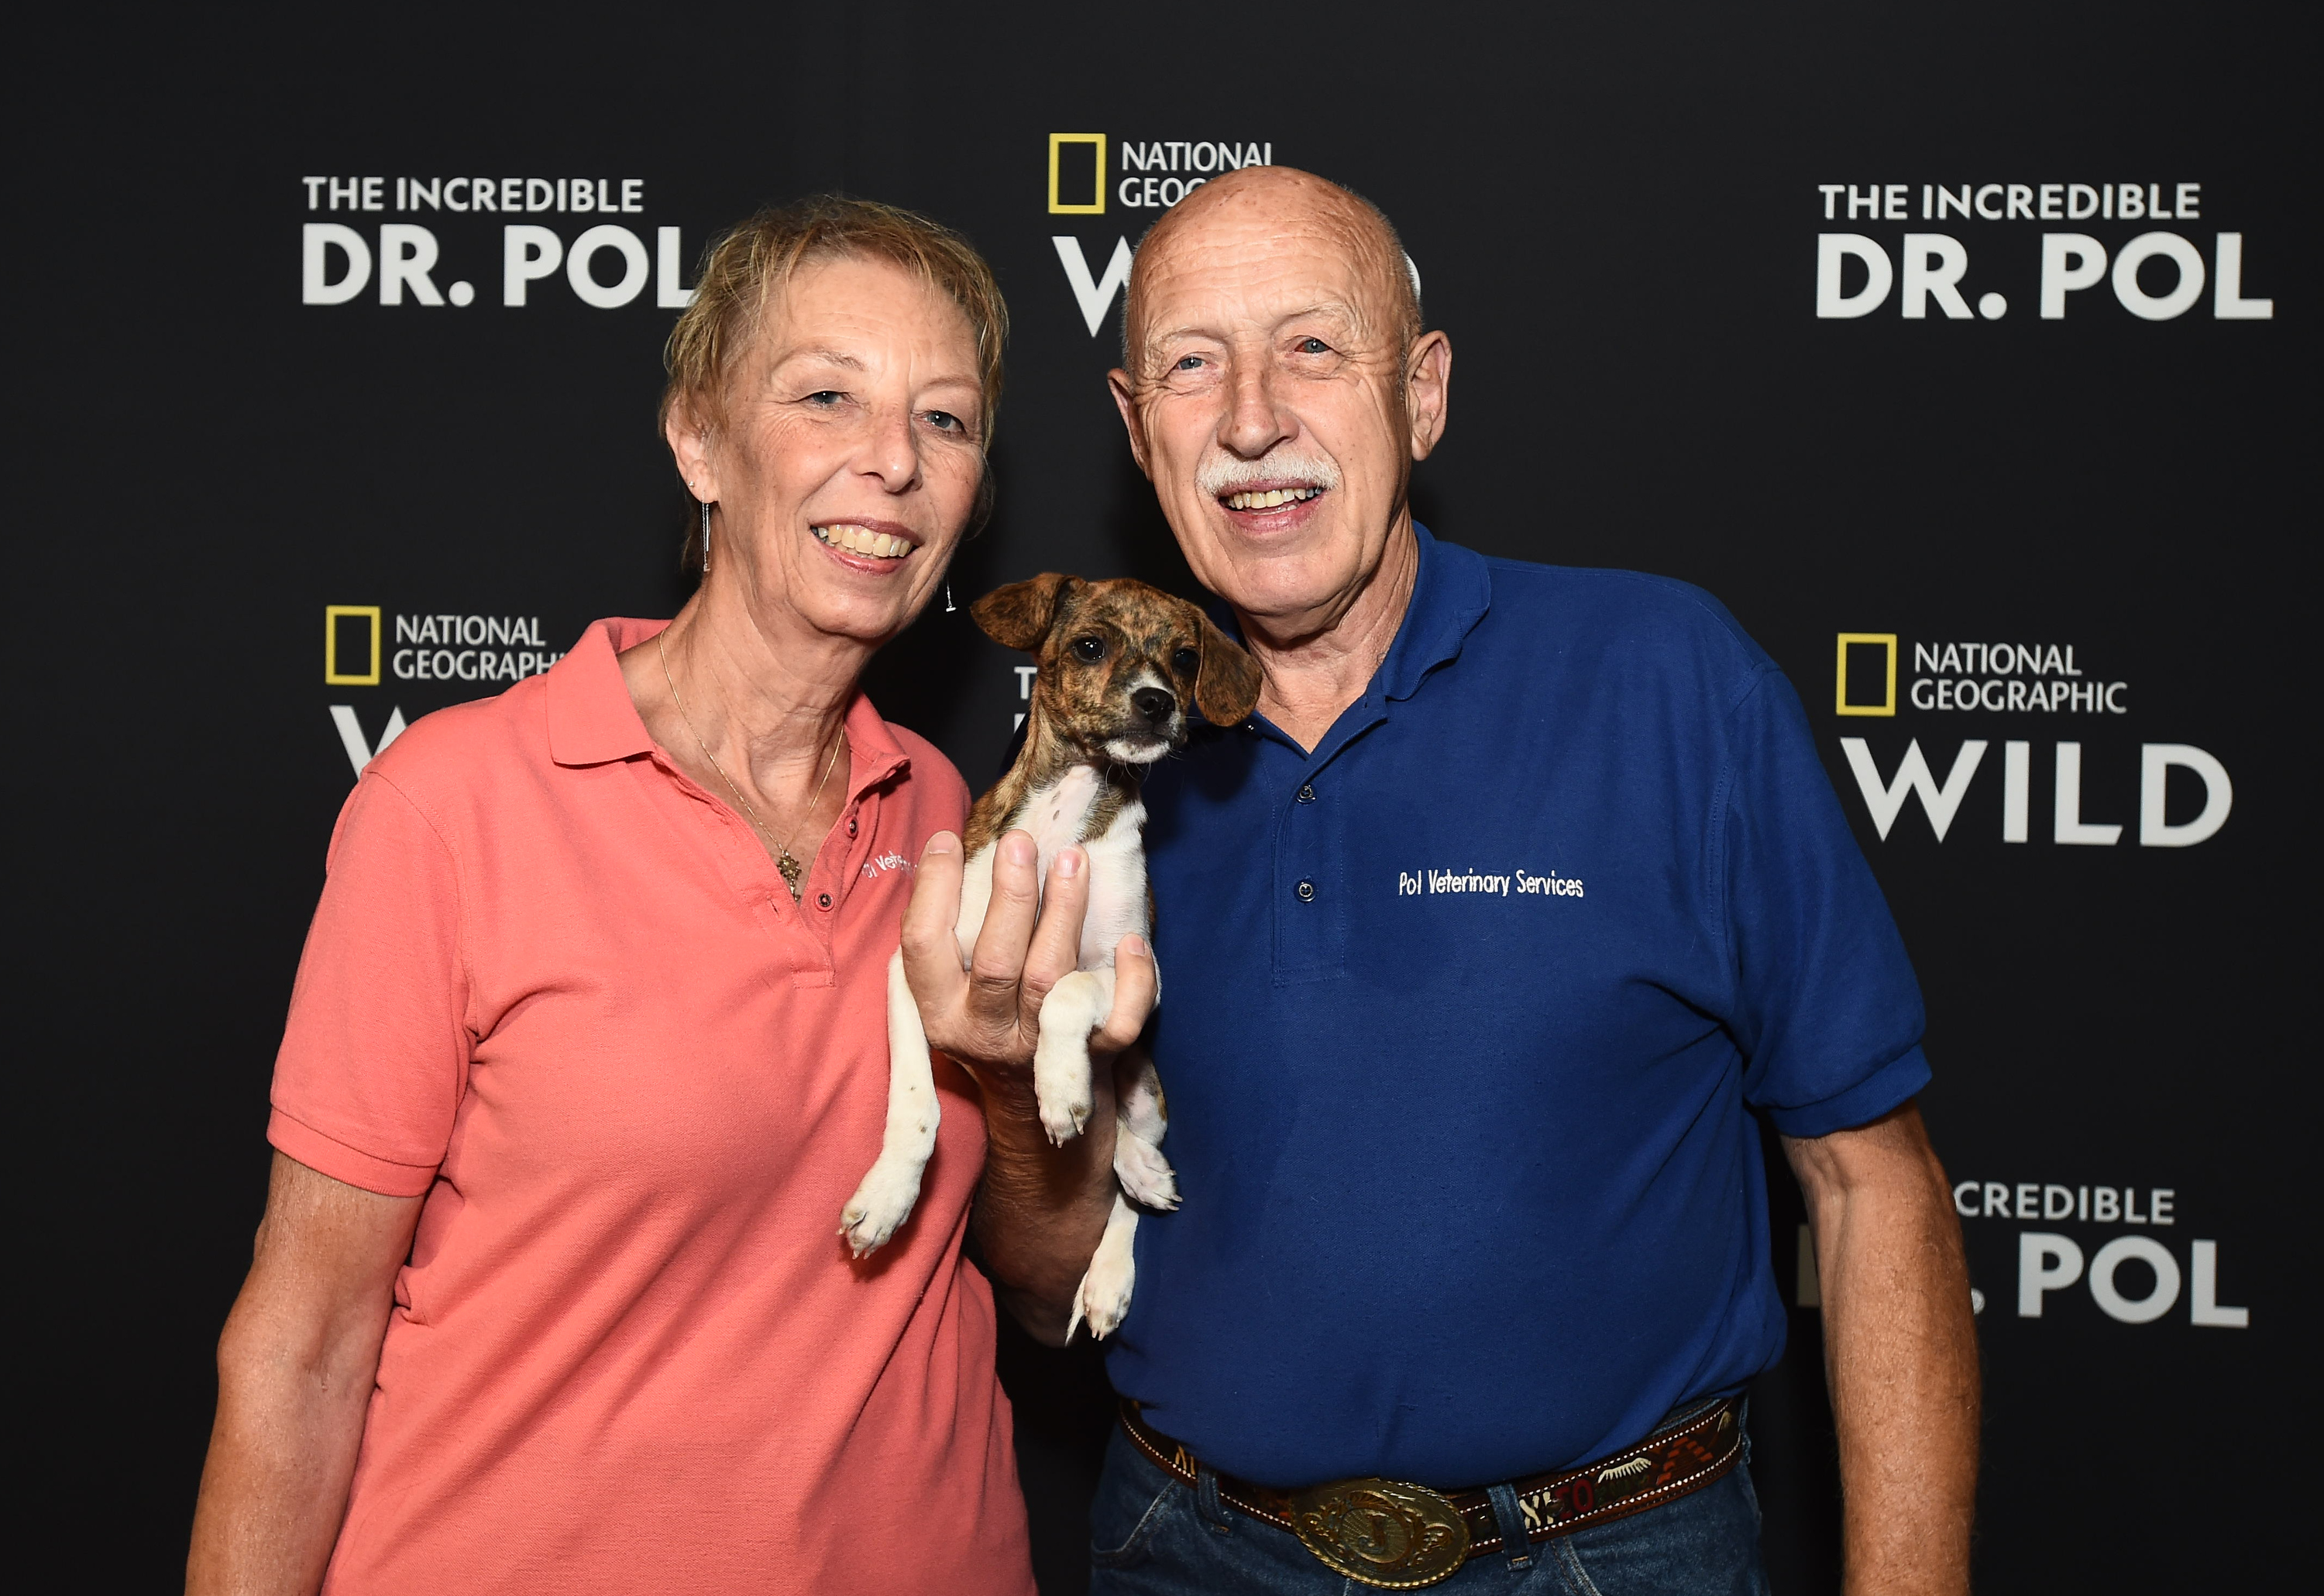 'The Incredible Dr. Pol' star Dr. Jan Pol, right, with his wife Diane Pol